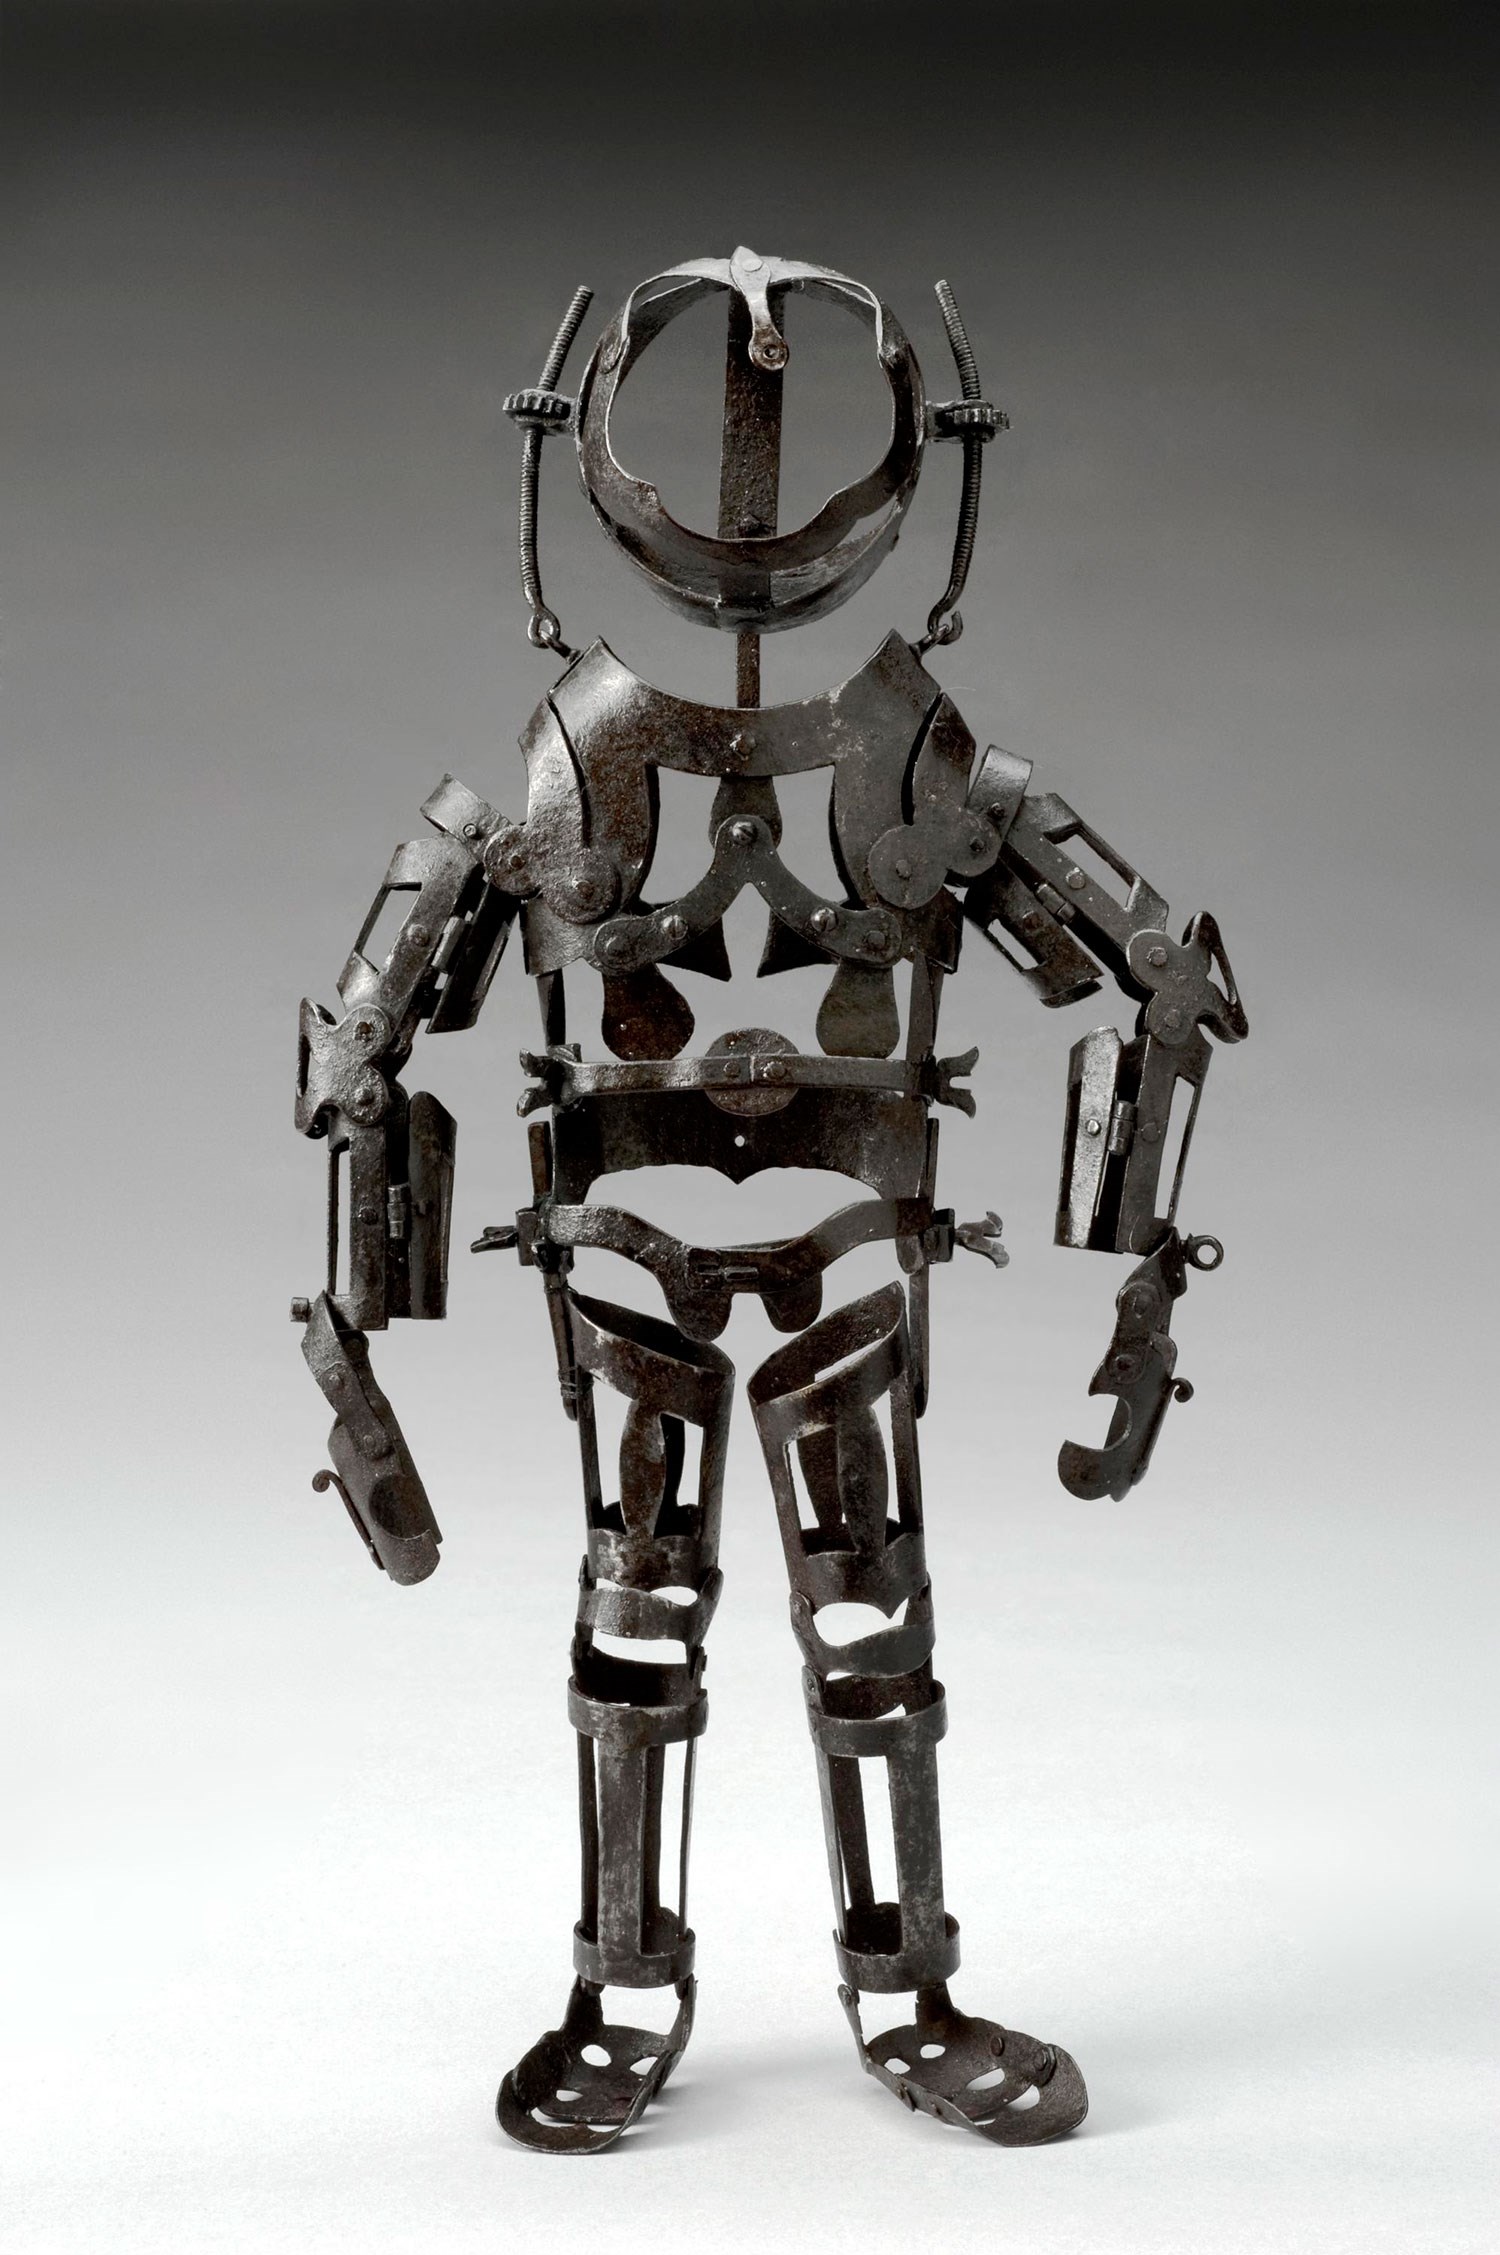 Manikin used to illustrate the articulation of the human body, 1582–1600 © The Board of Trustees of the Science Museum.